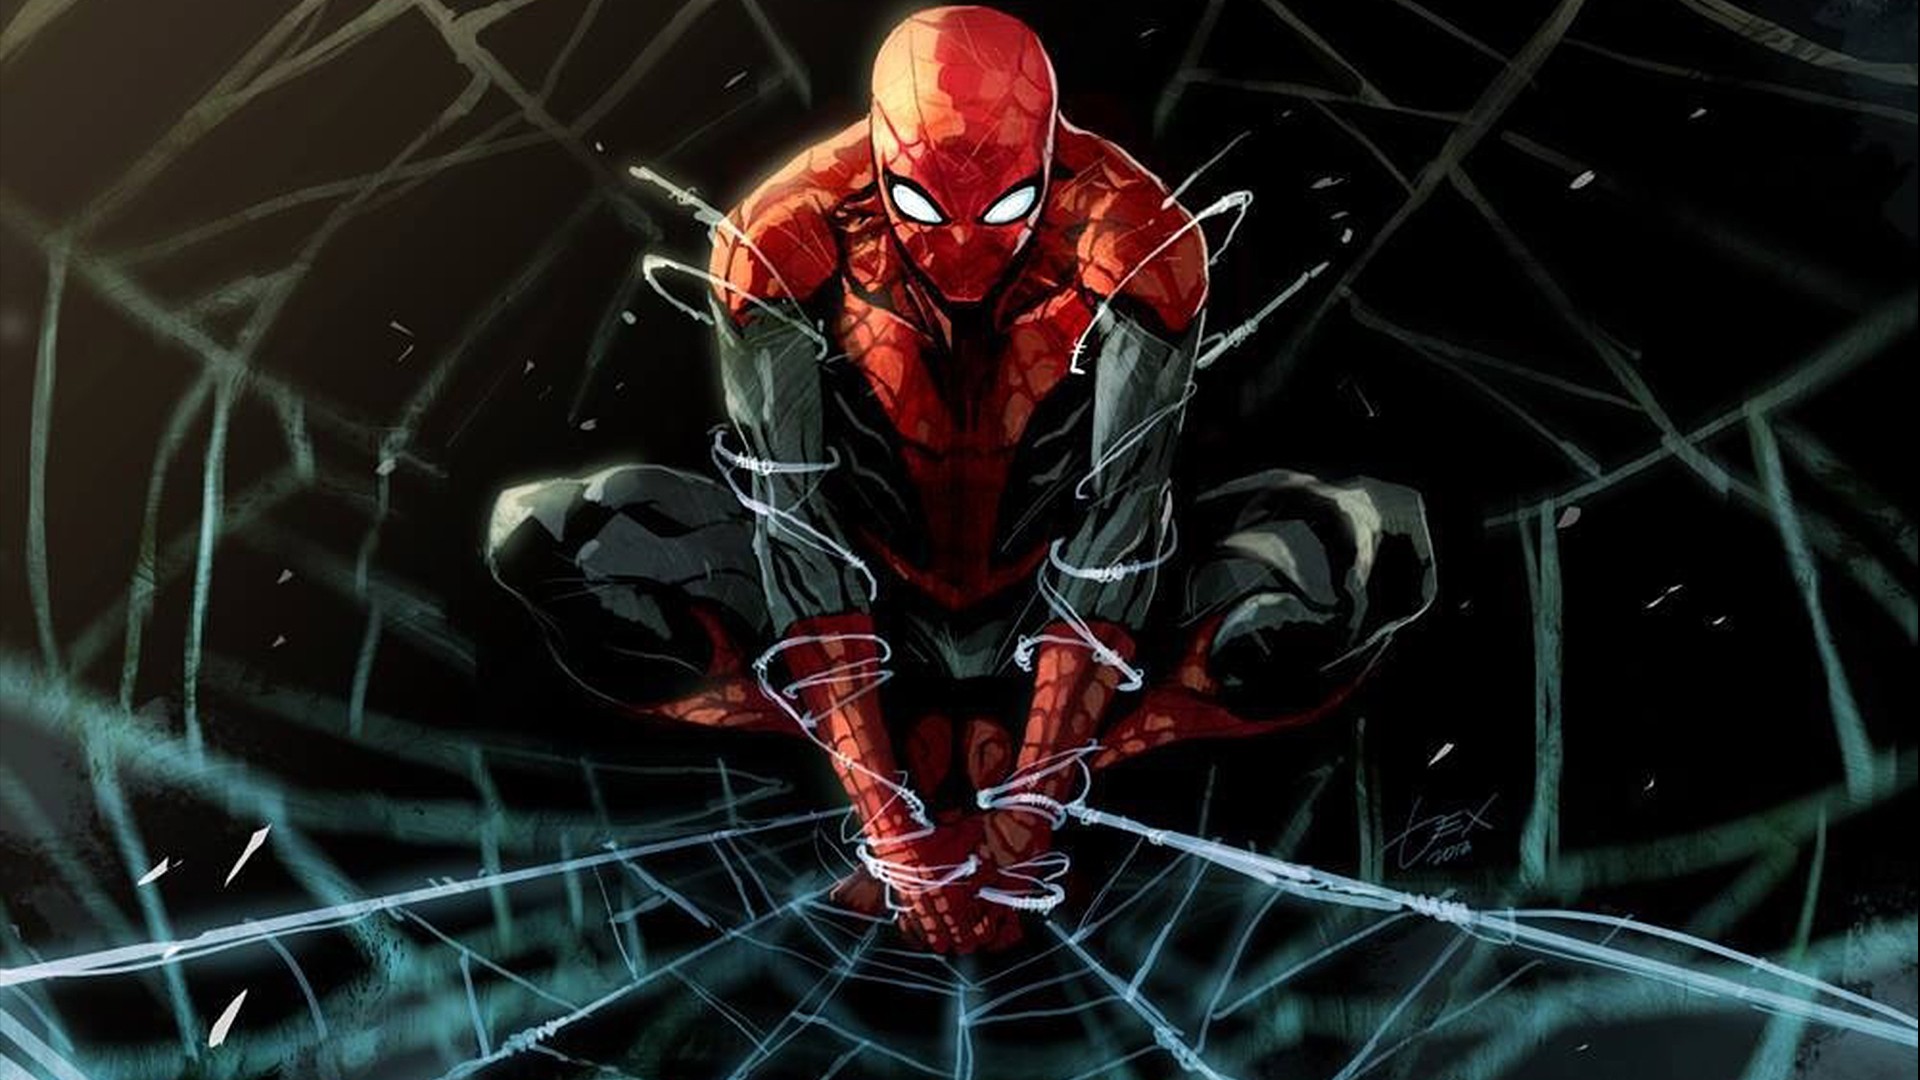 Spider Man Wallpaper Marvel Vs Dc From Batman To Spiderman The Most